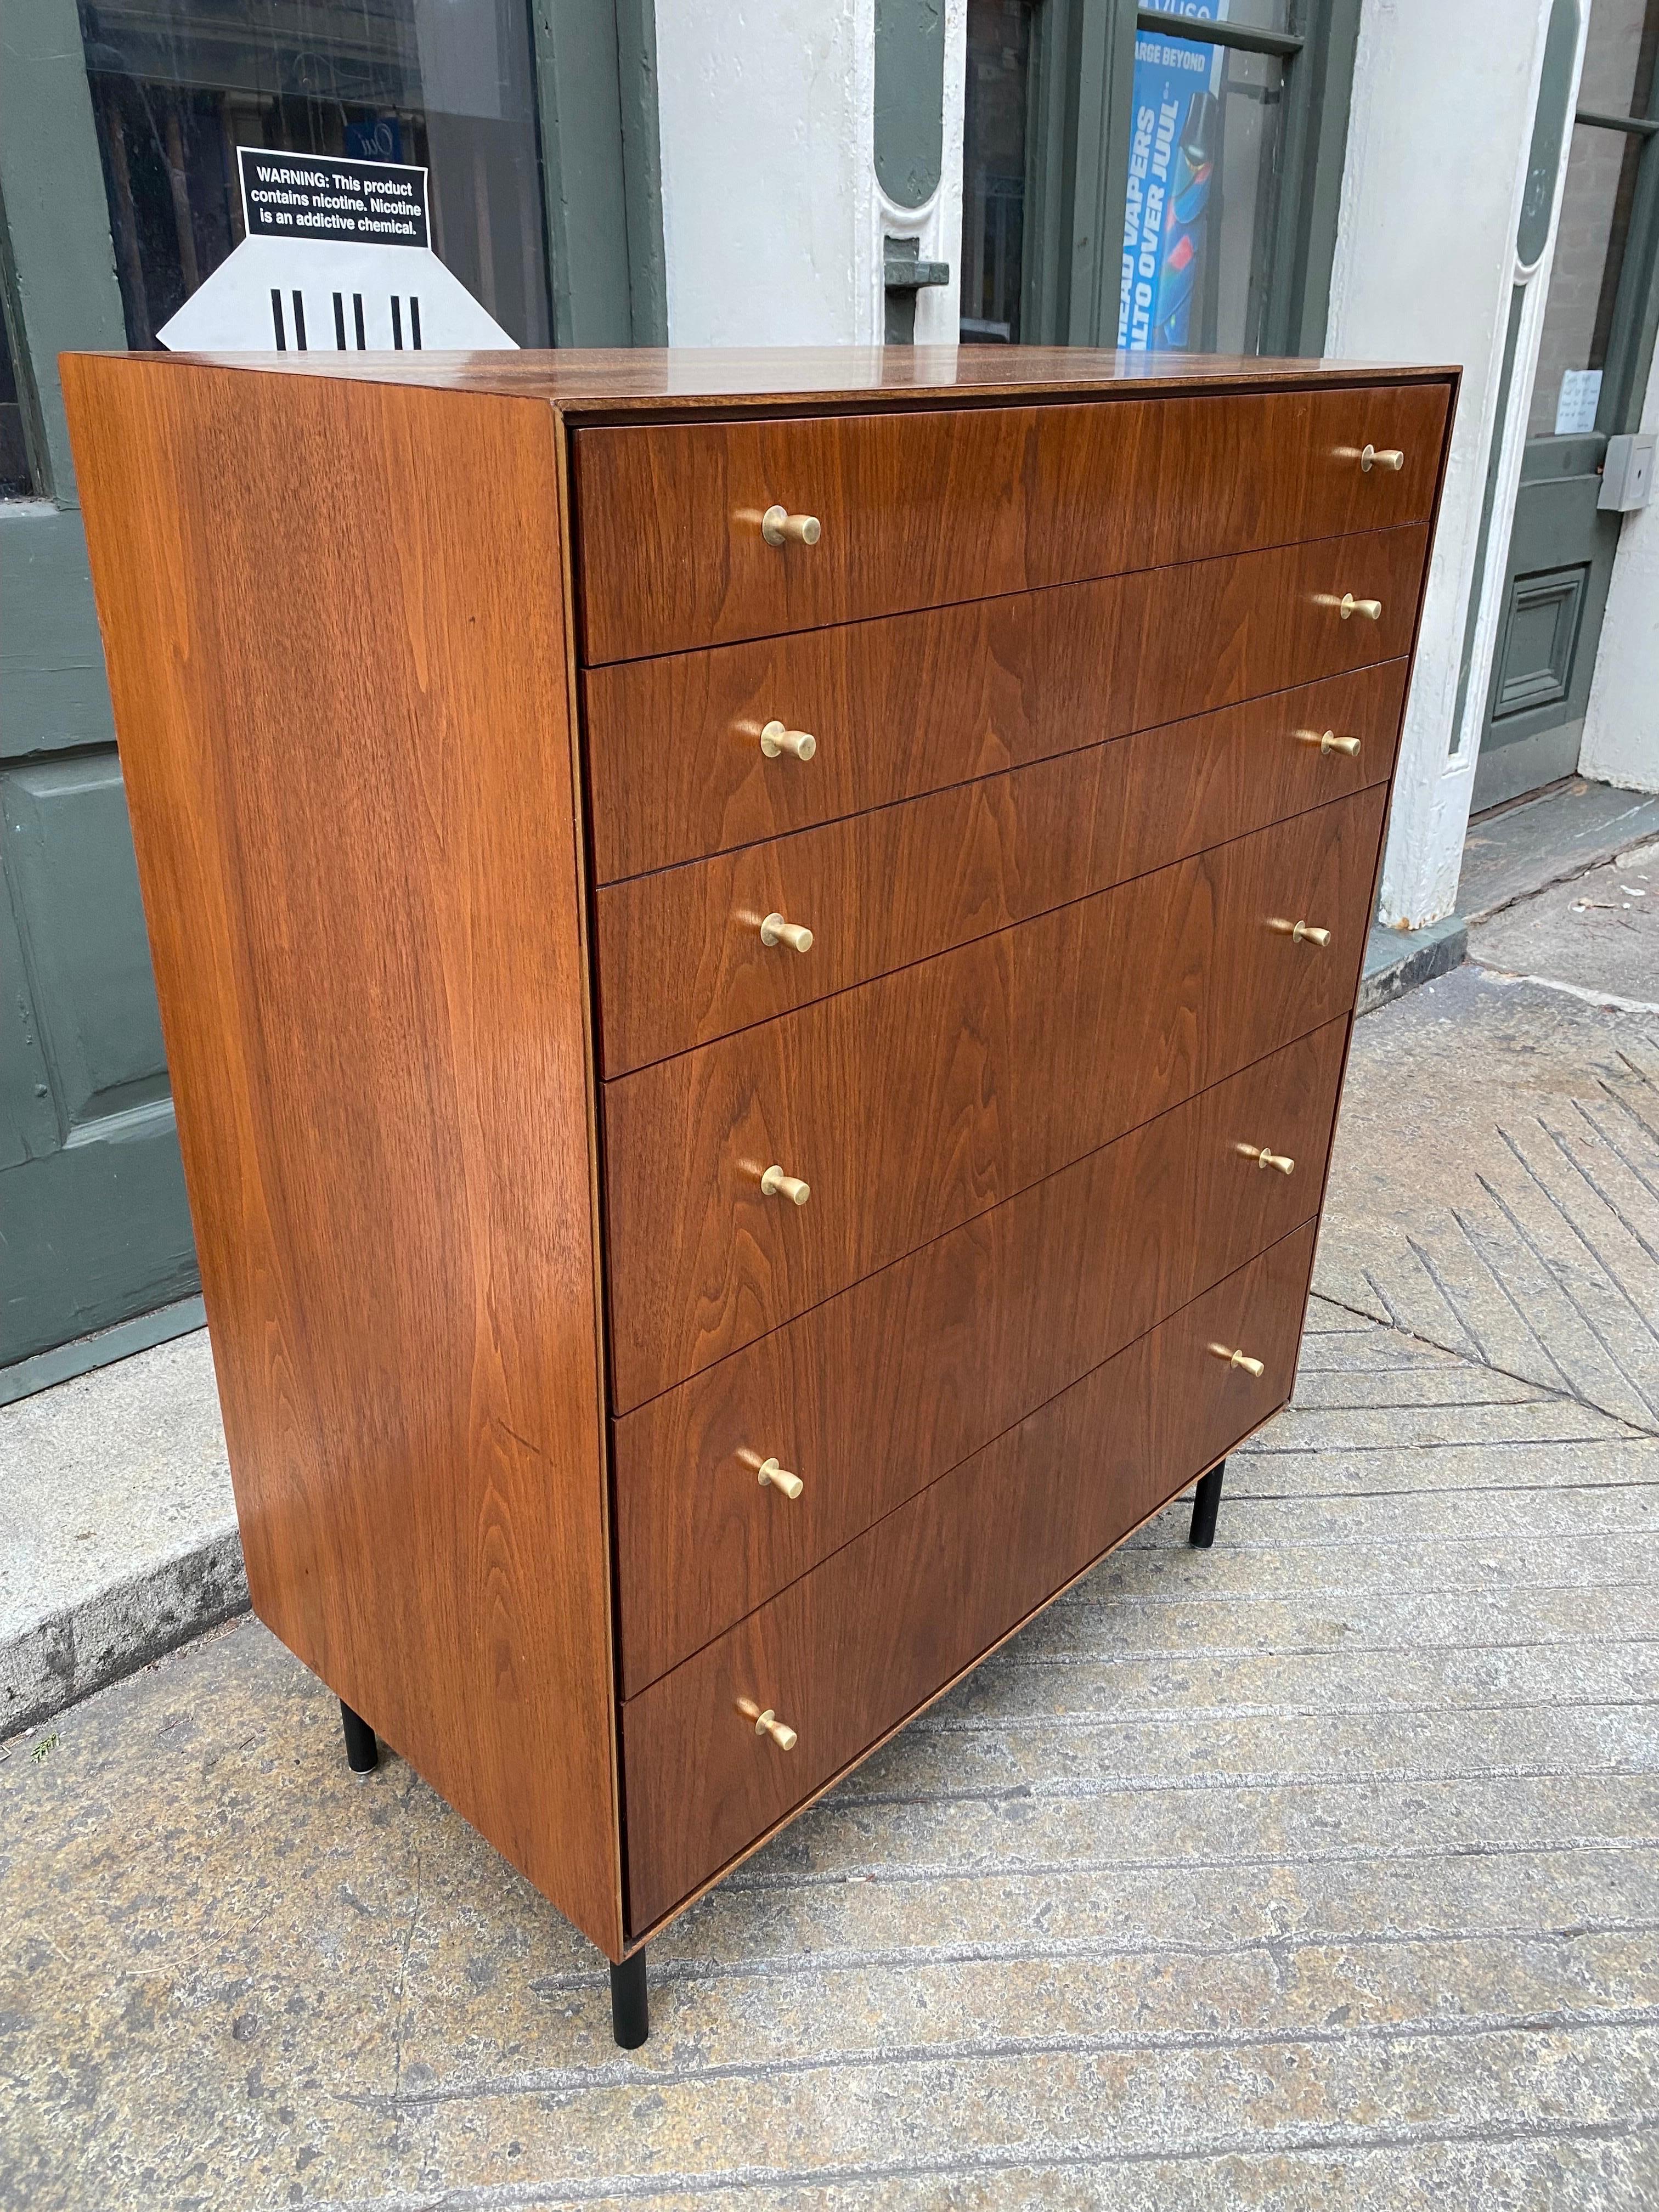 John Stuart Walnut Dresser with brass Knobs and new black iron legs.  Book matched walnut veneer gives this dresser an amazing look!  One shallow top drawer and then 4 deep drawers below, 2nd drawer has the appearance of two more shallow drawers. 